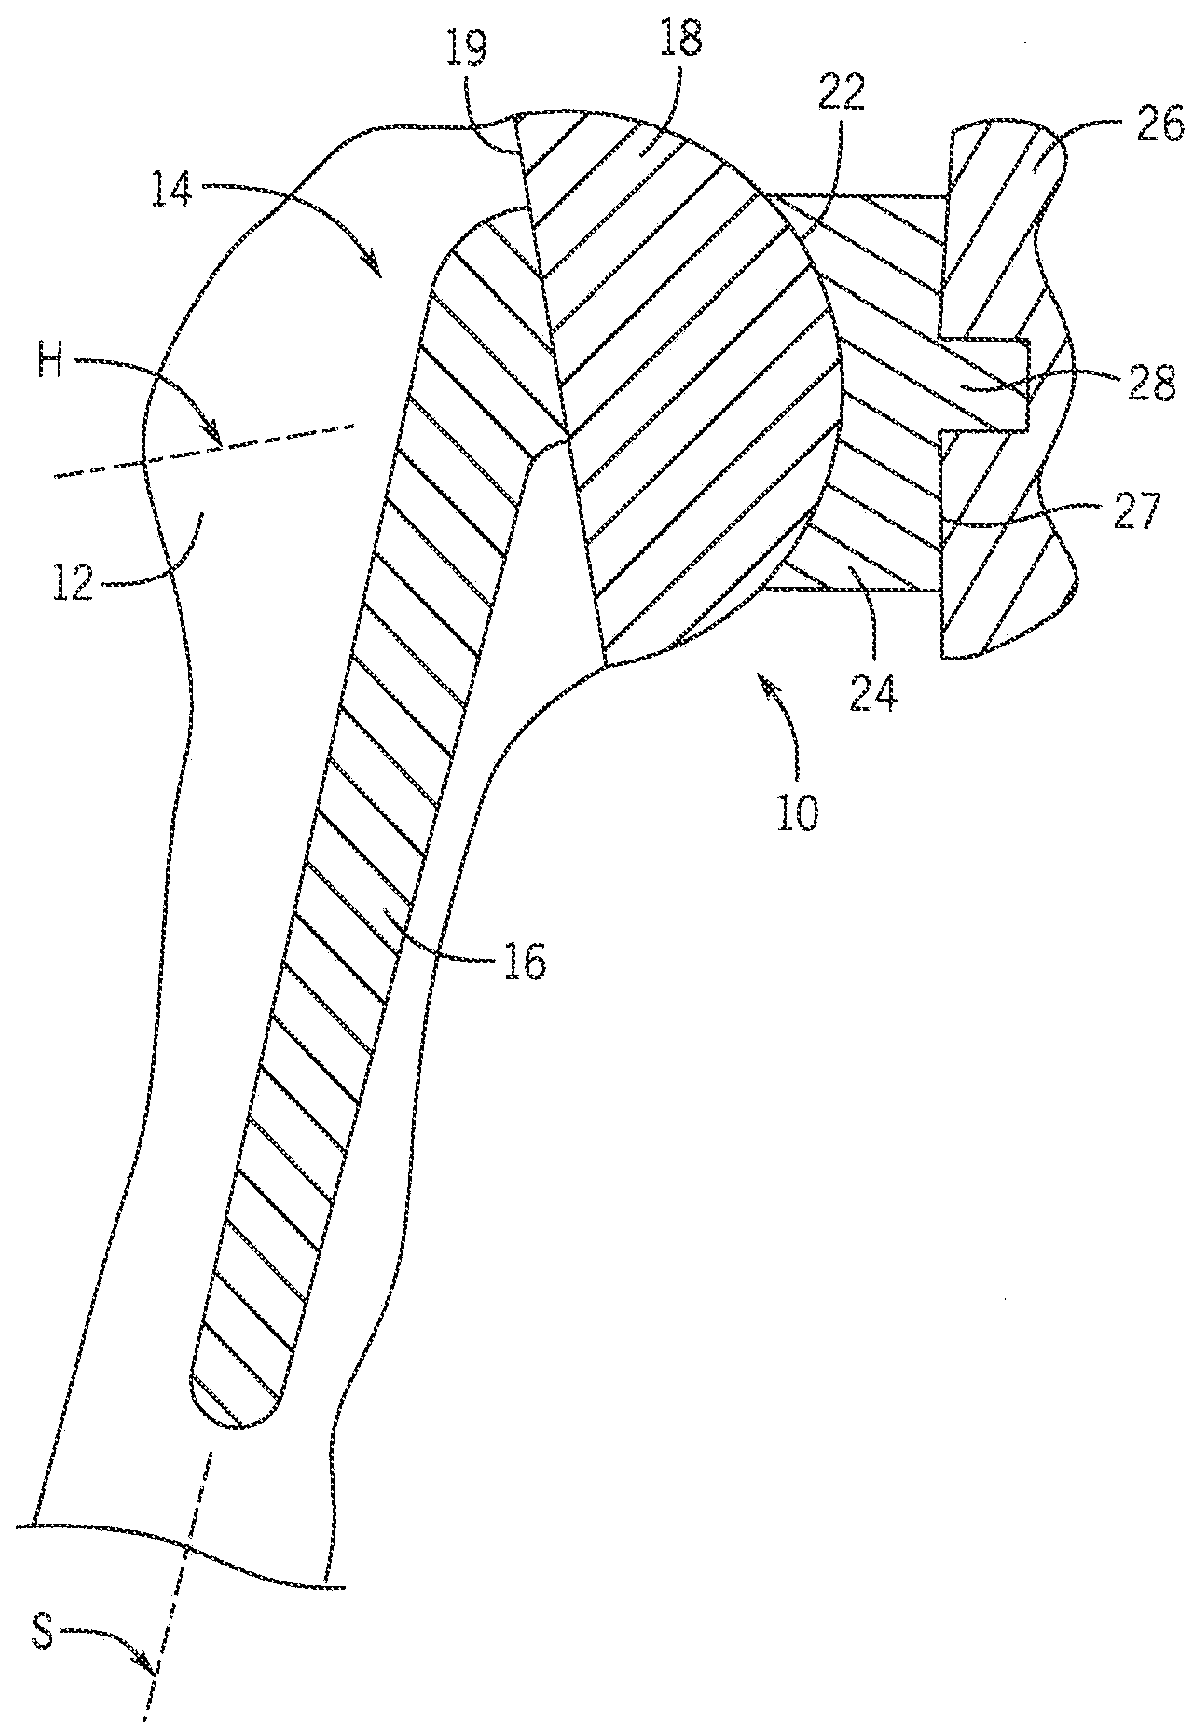 Shoulder prosthesis with variable inclination humeral head component